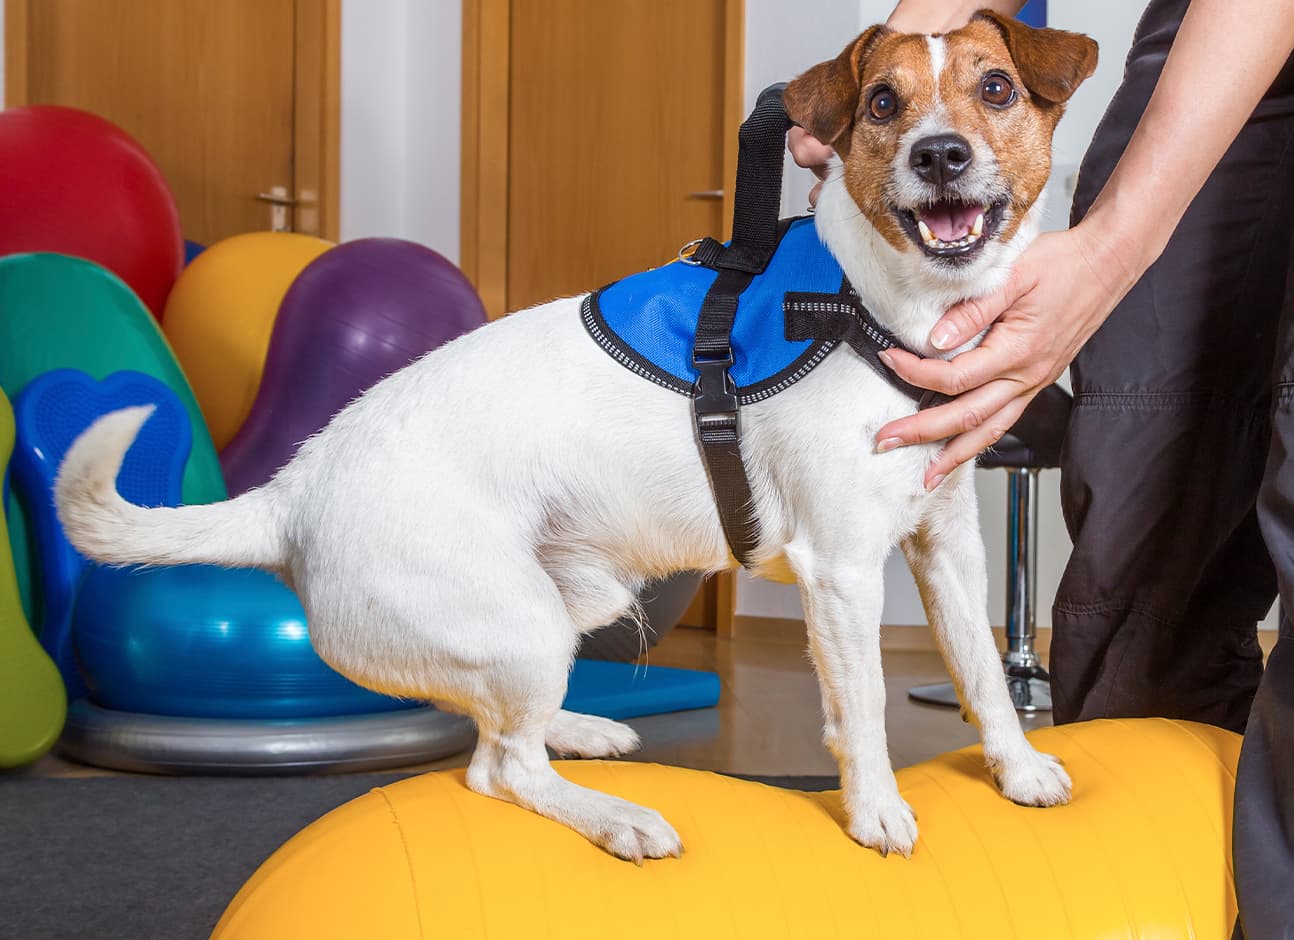 PHYSICAL REHABILITATION IN DOGS